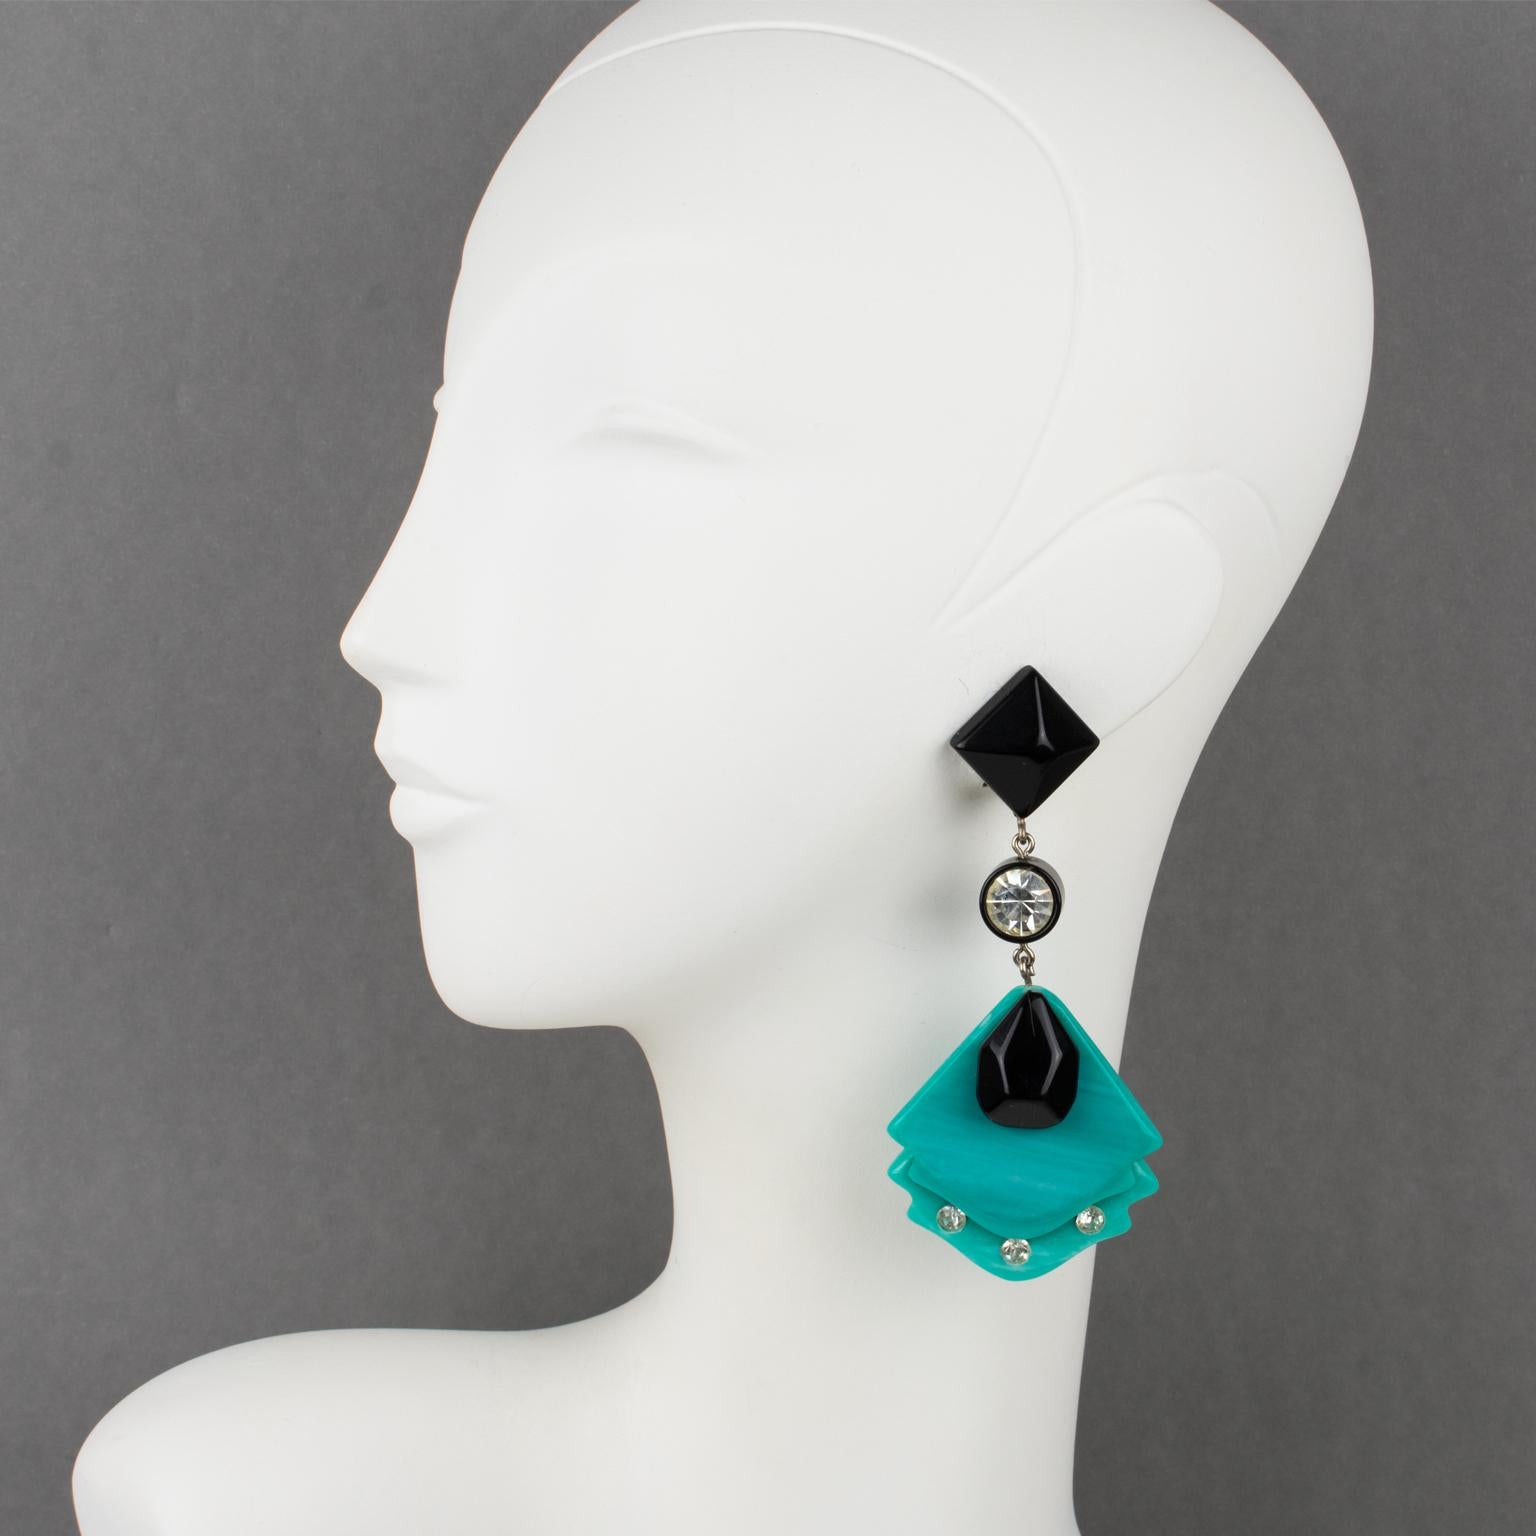 These stunning Pierre Cardin modernist dangling clip-on earrings were designed in the 1970s. The earrings boast a long shoulder-duster geometric shape with black and turquoise resin elements. The earrings have embellishments with crystal